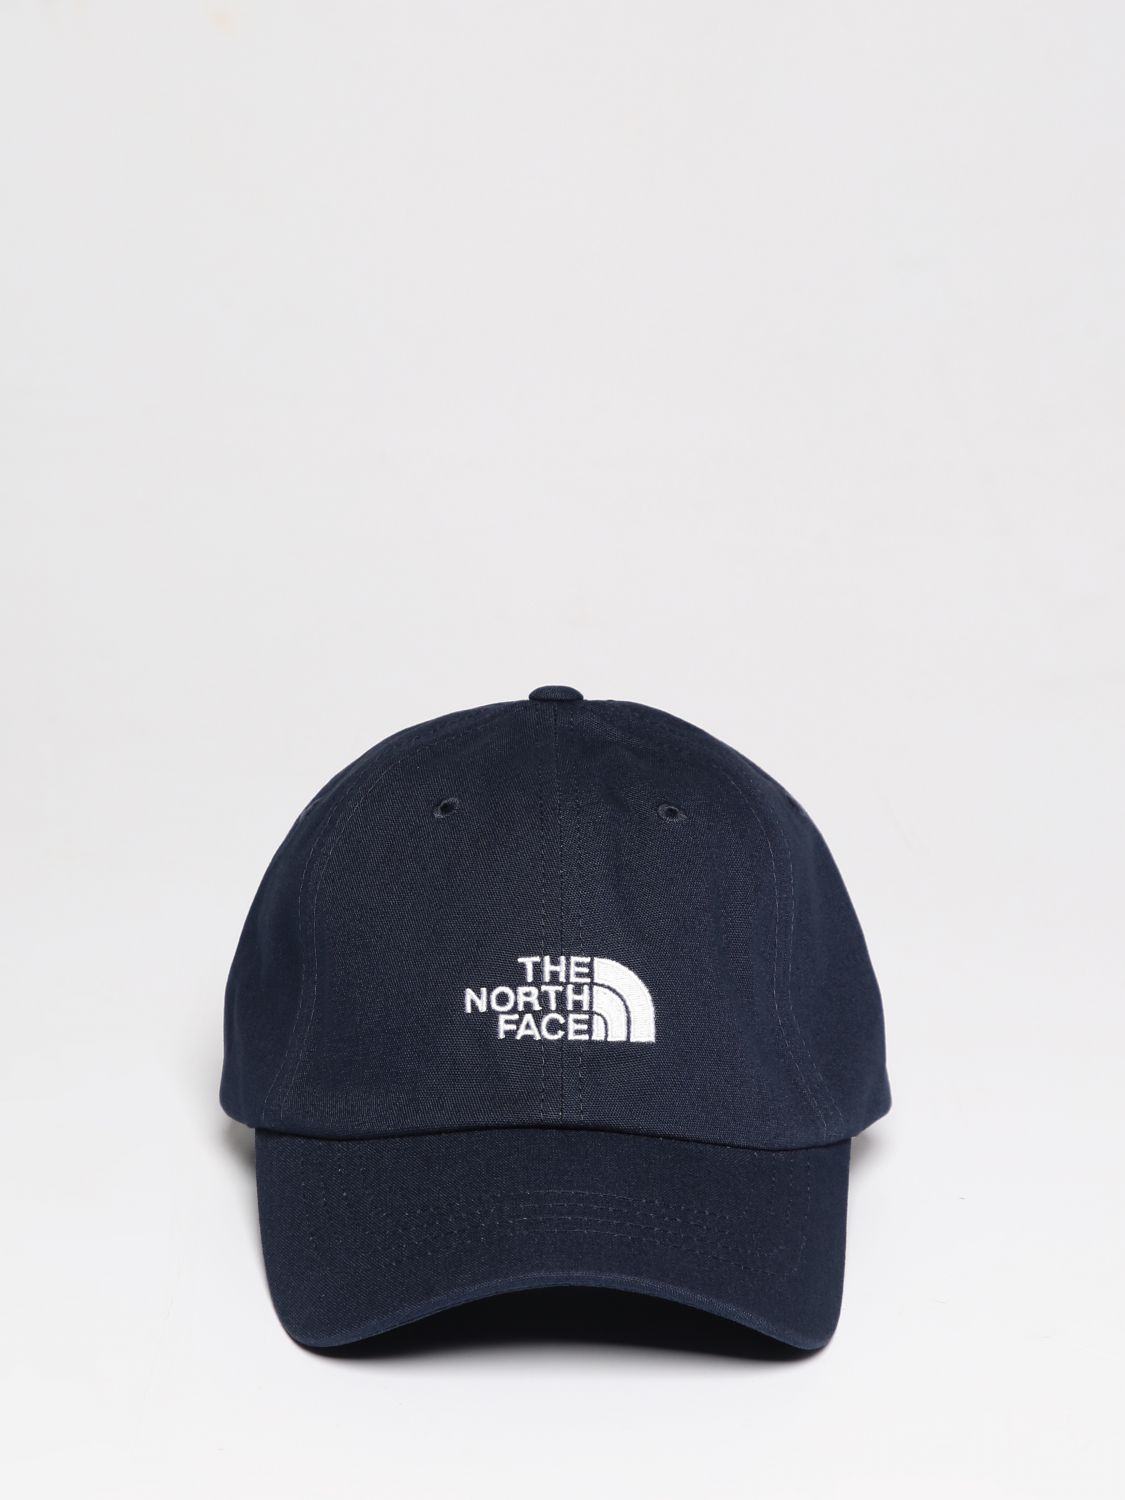 Hut The North Face: The North Face Herren Hut navy 2